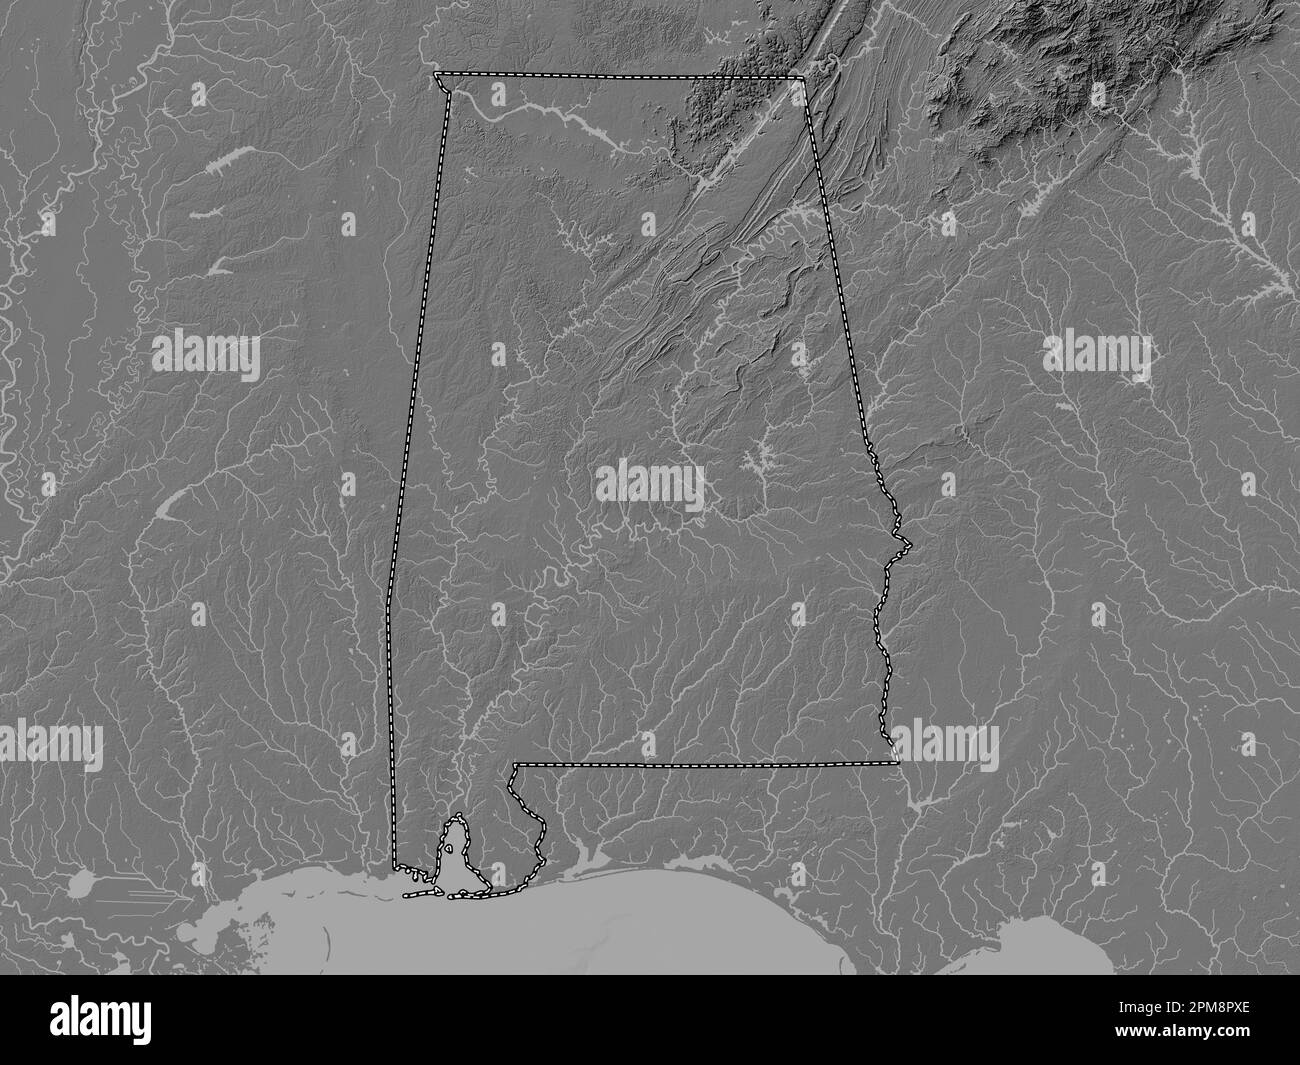 Alabama, state of United States of America. Bilevel elevation map with lakes and rivers Stock Photo